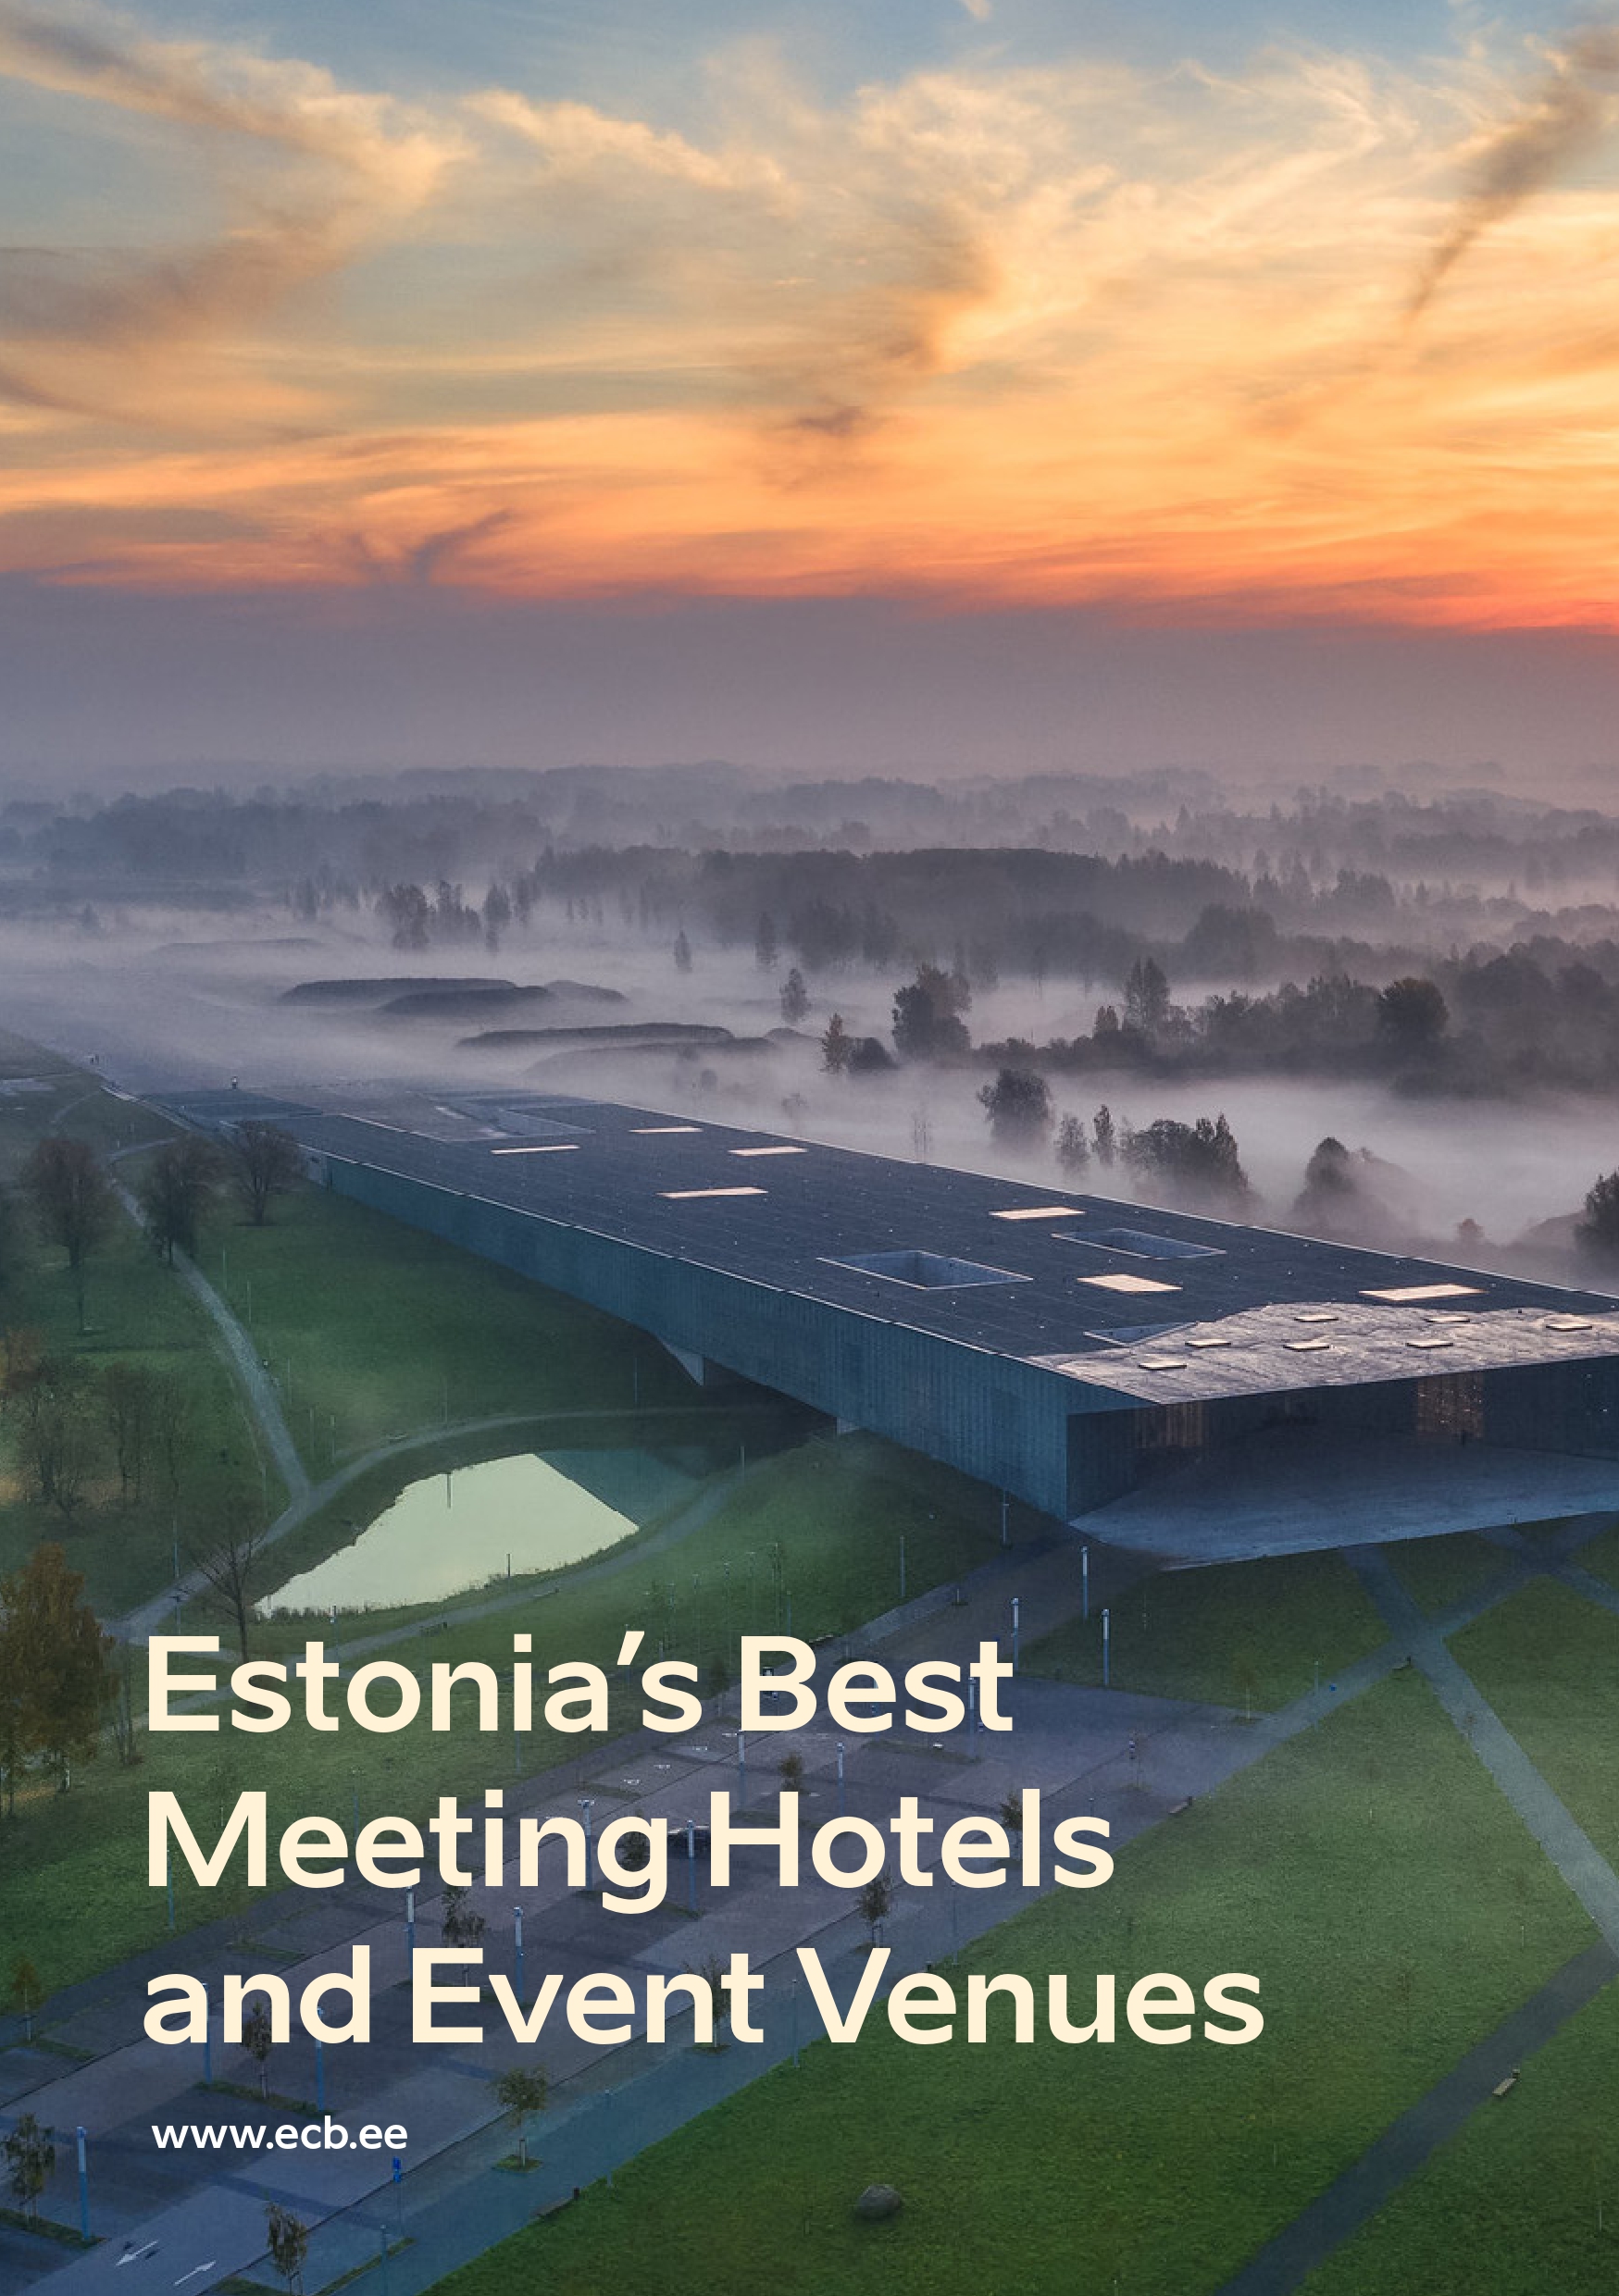 Estonia's best meeting hotels and event venues